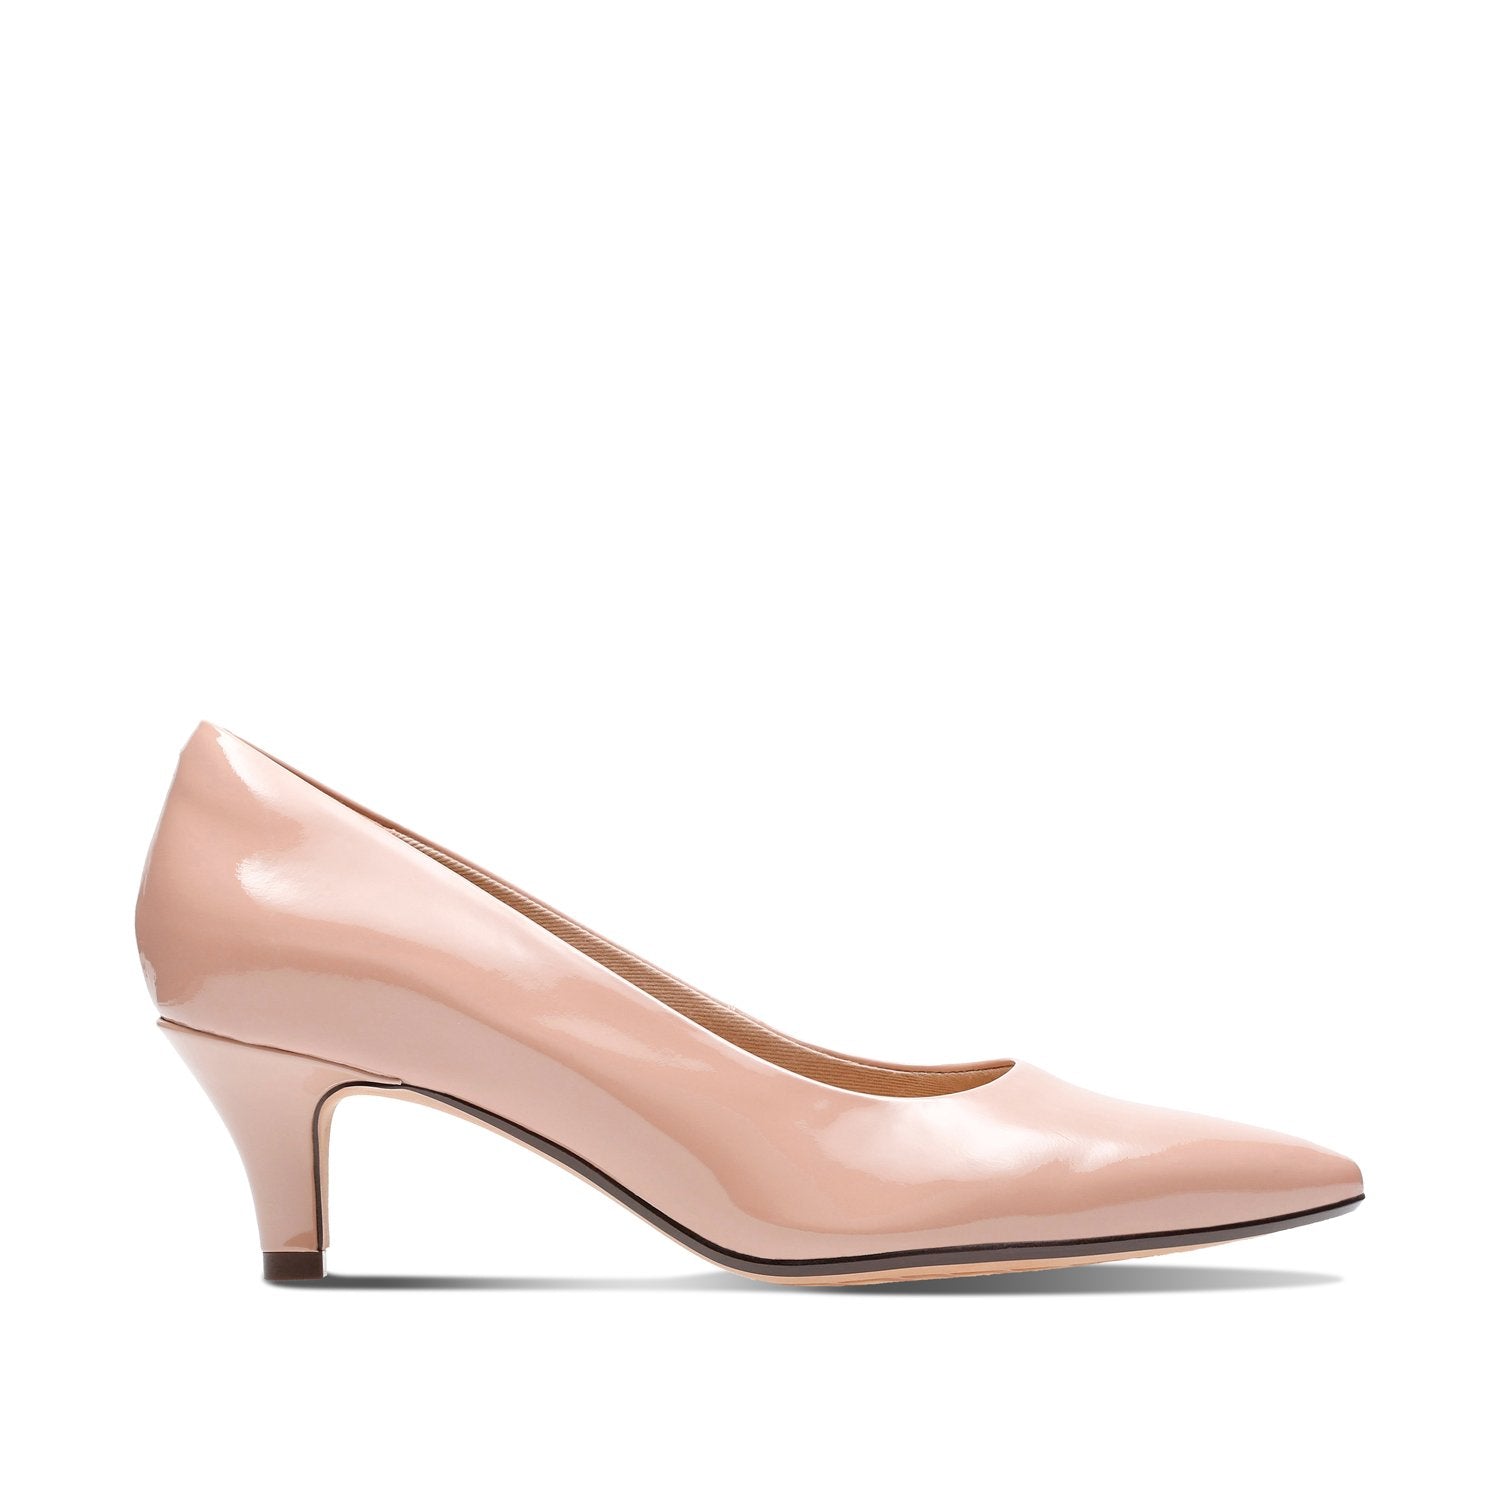 Clarks-Linvale-Jerica-Women's-Shoes-Nude-Patent-26138198